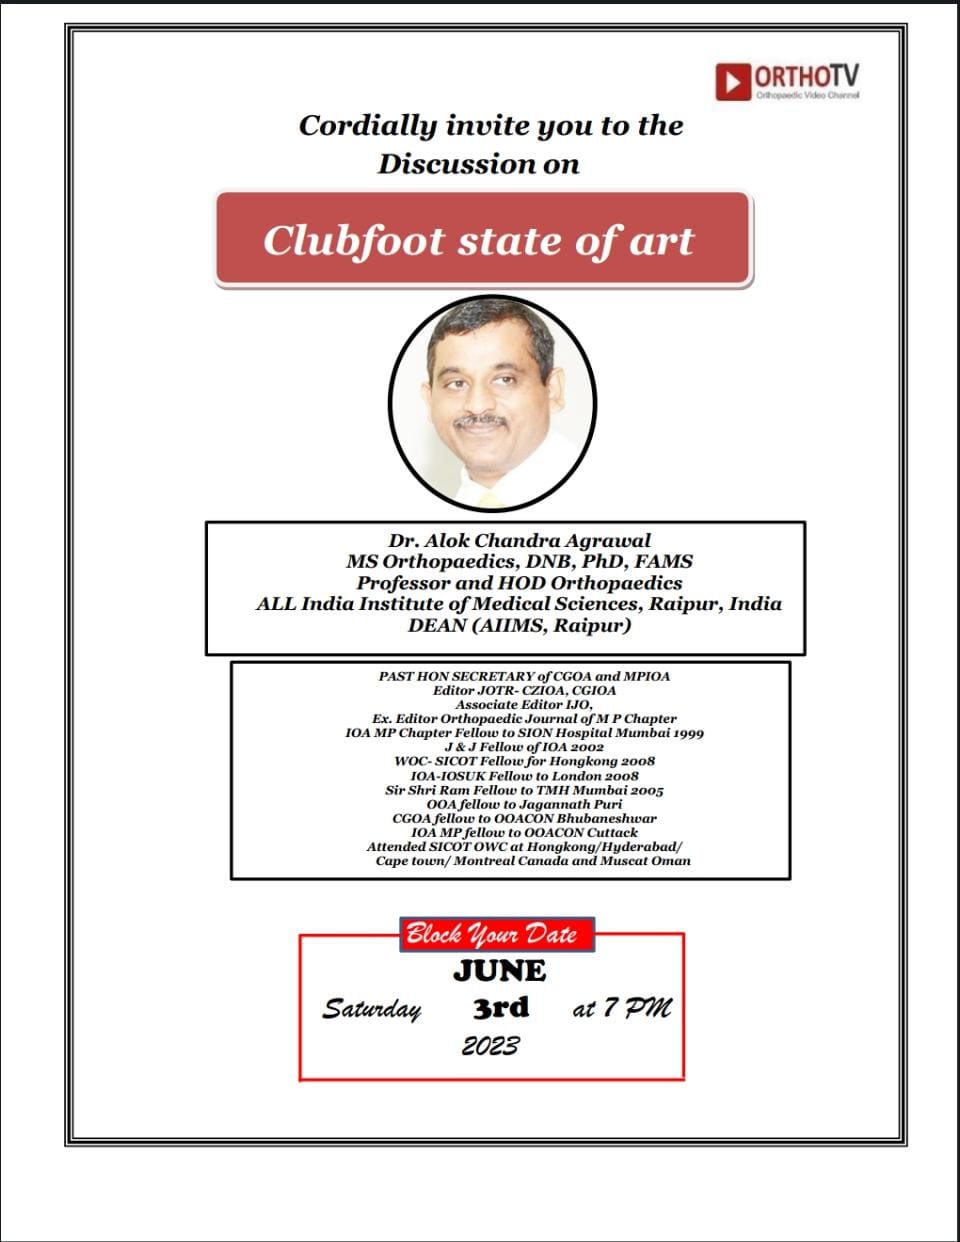 Cordially invite you to the Discussion on Clubfoot state of art - Dr. Alok Chandra Agrawal